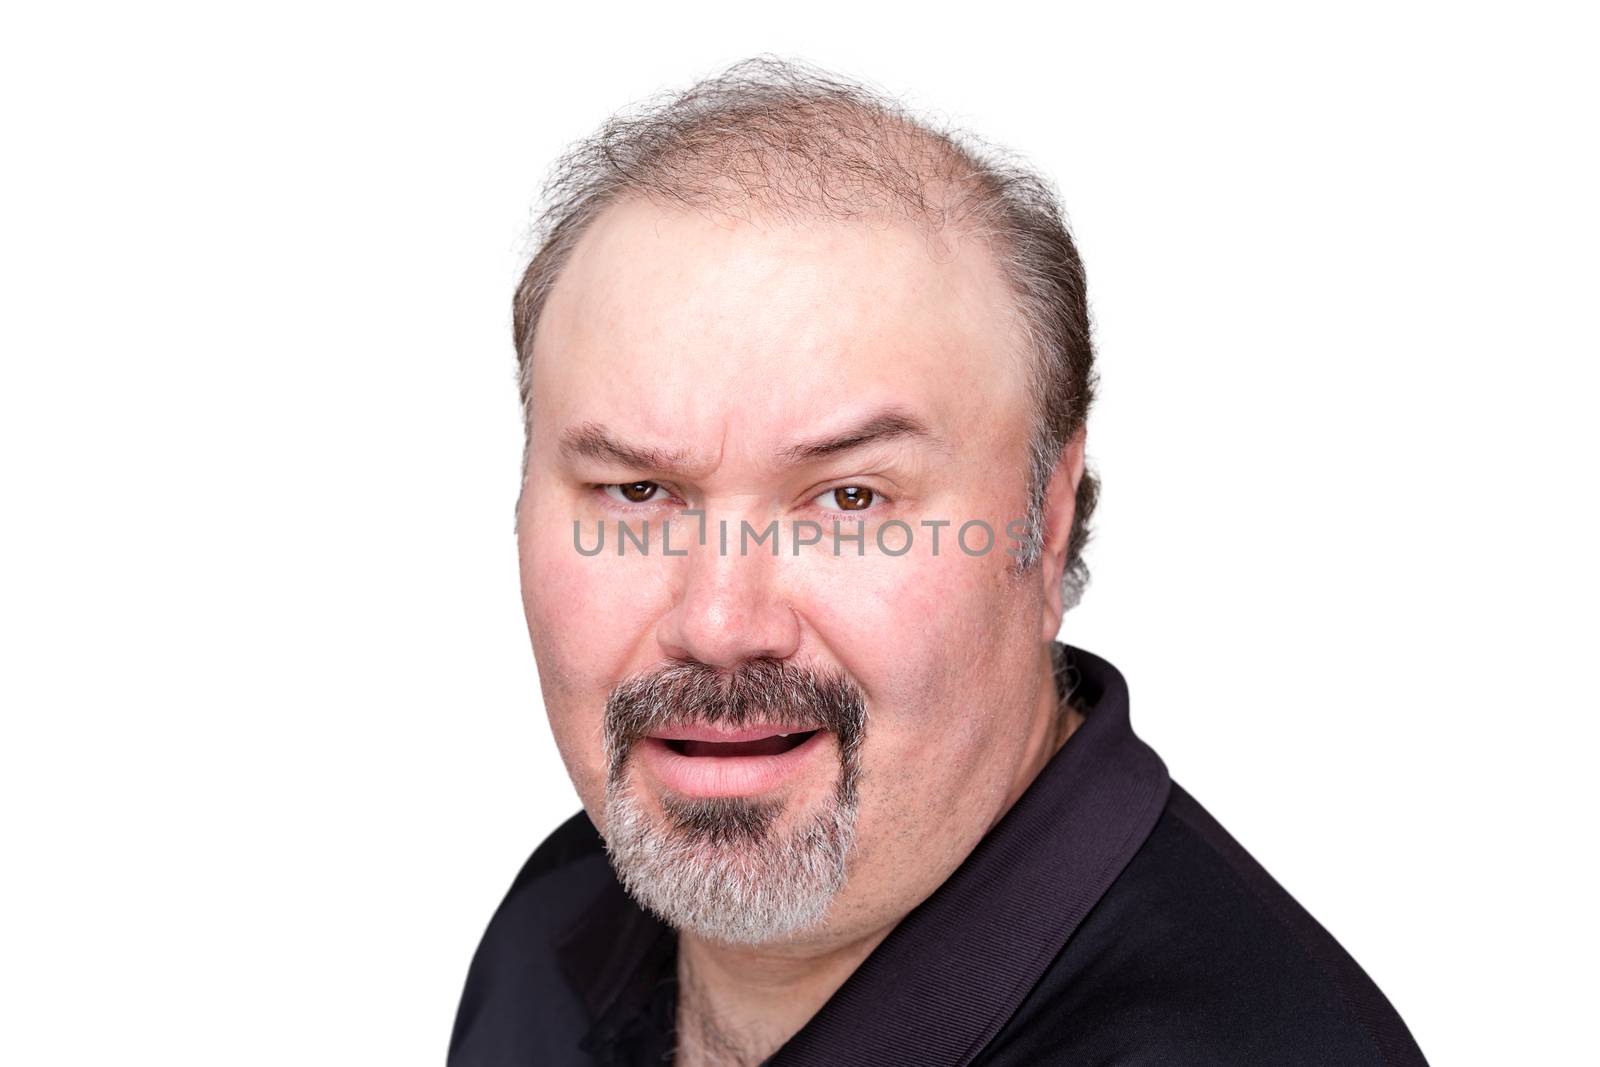 Incredulous man raising his eyebrow as he questions the veracity of something with a scoffing sneer, isolated on white